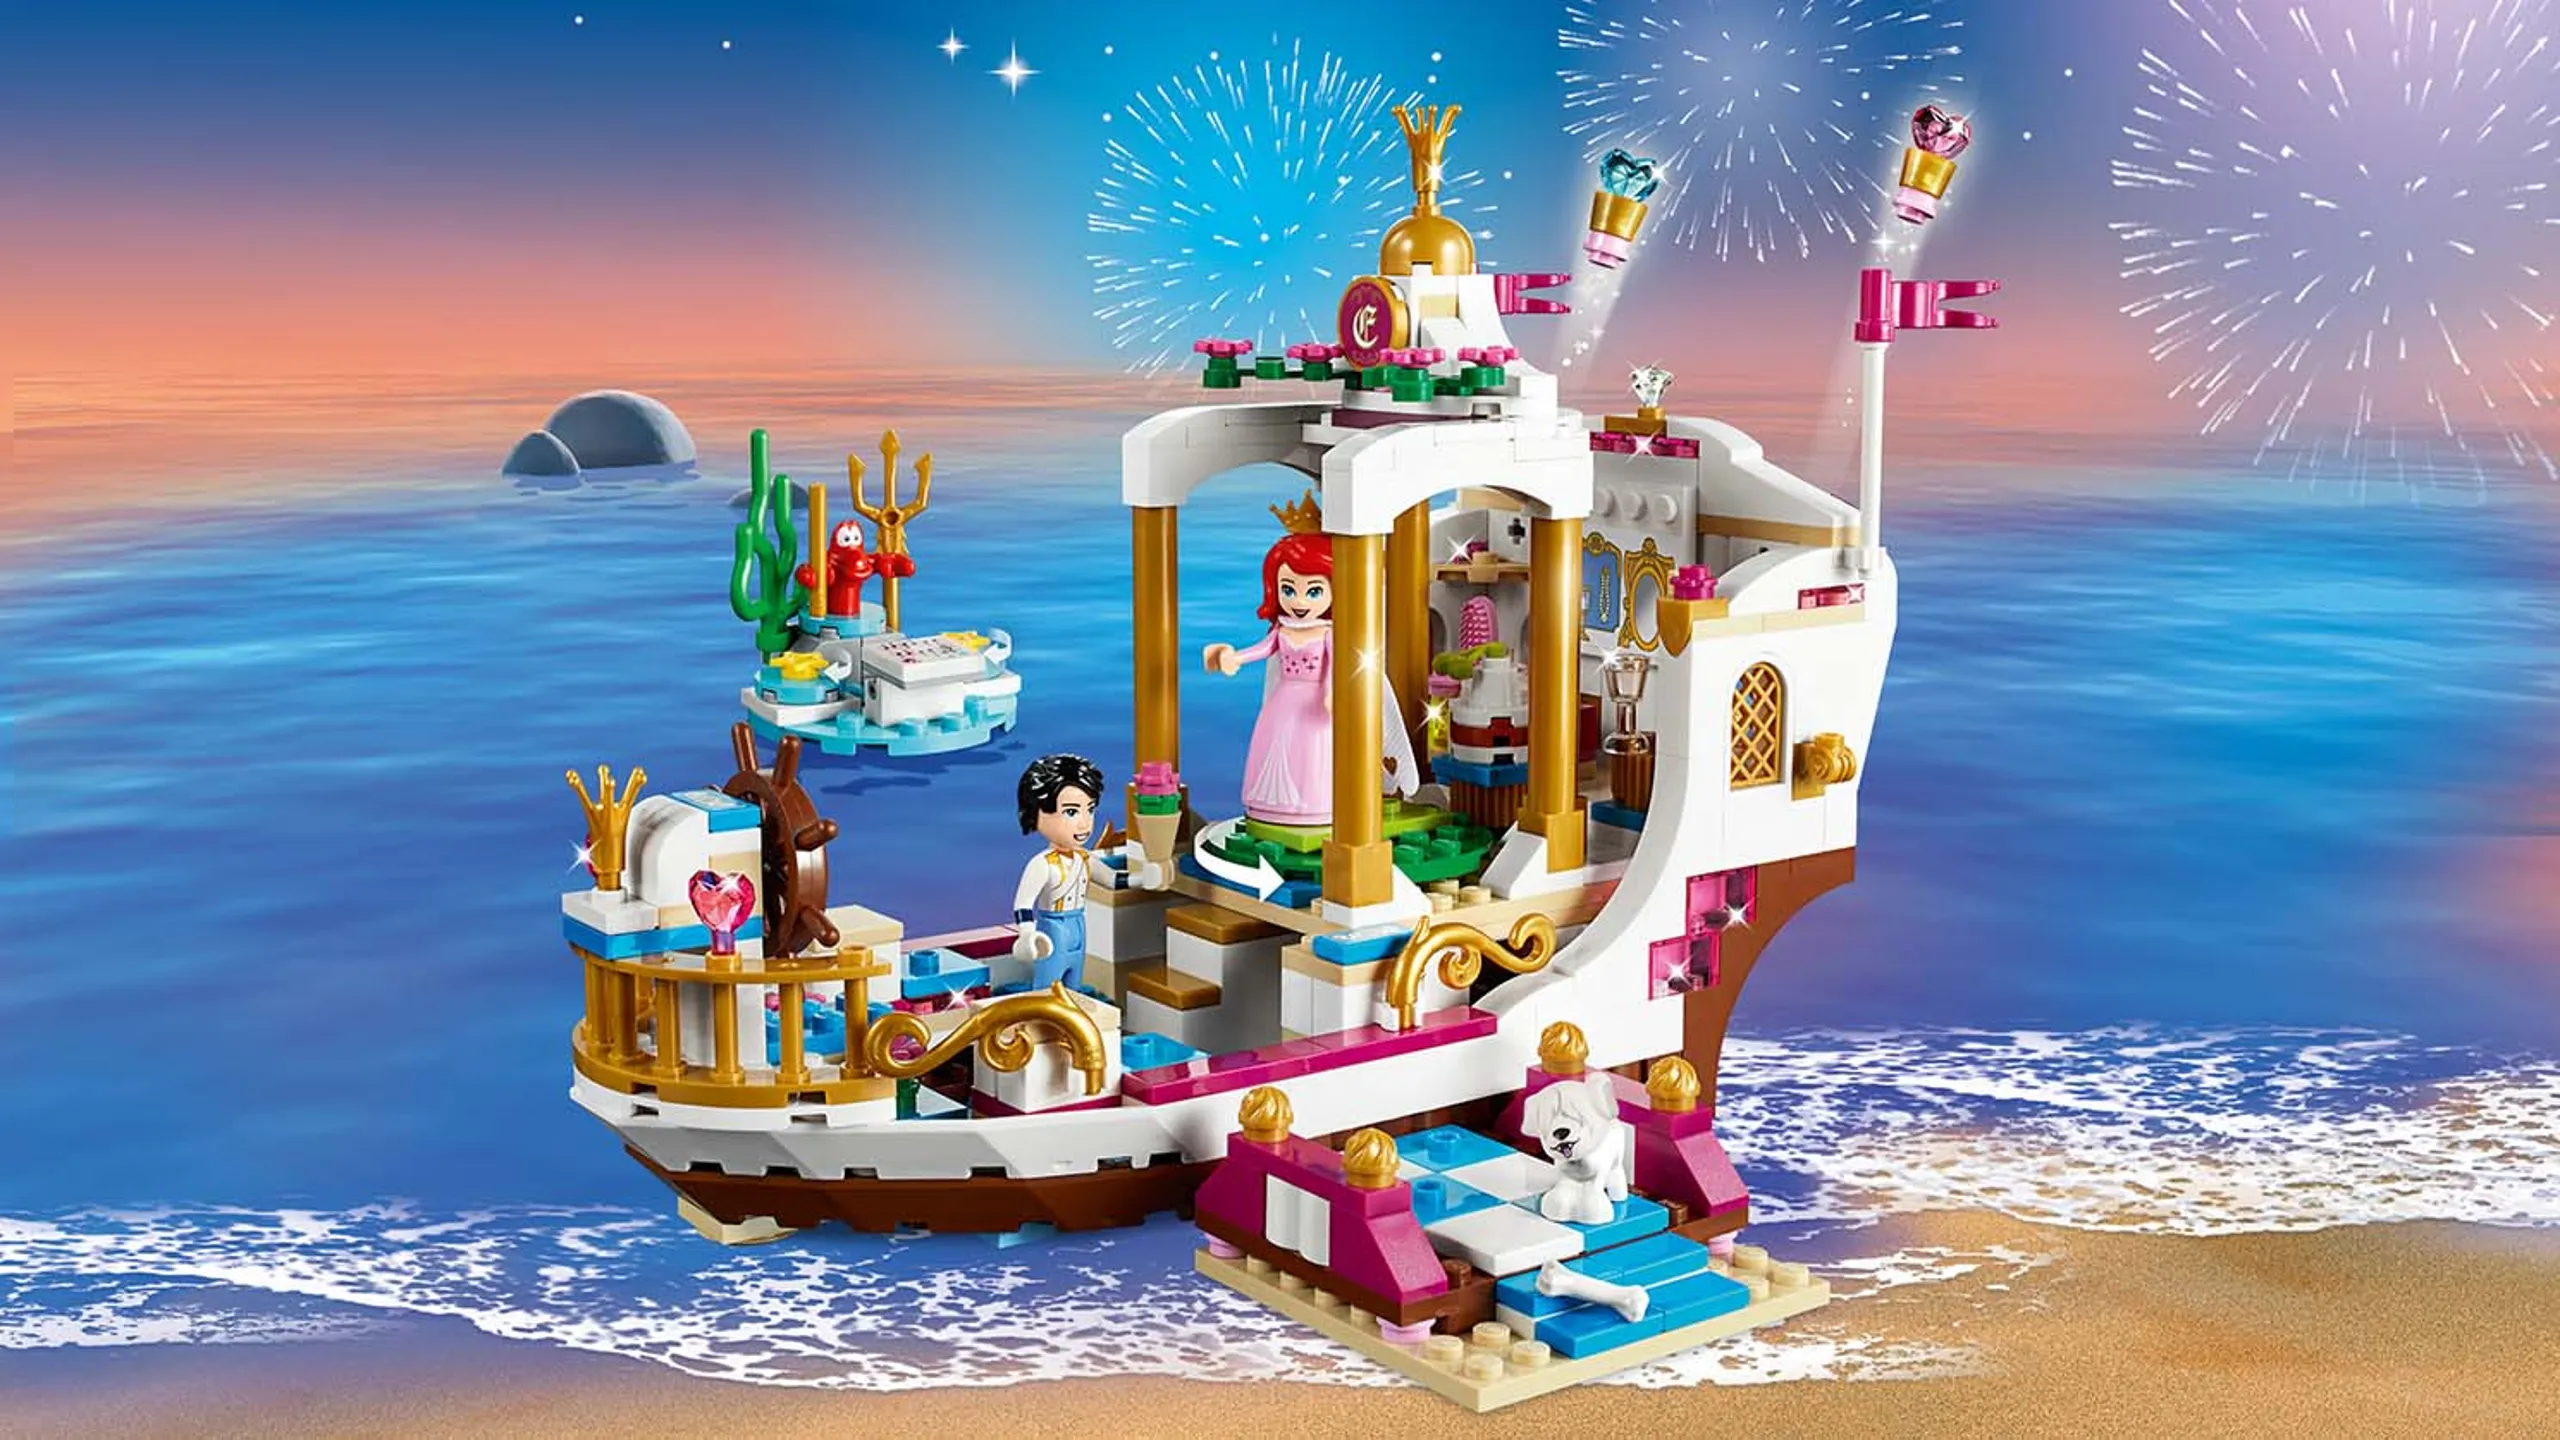 LEGO Disney - 41153 Ariel's Royal Celebration Boat - Ariel, Prince Eric and their dog Max sets sail in their royal boat to find the treasure .